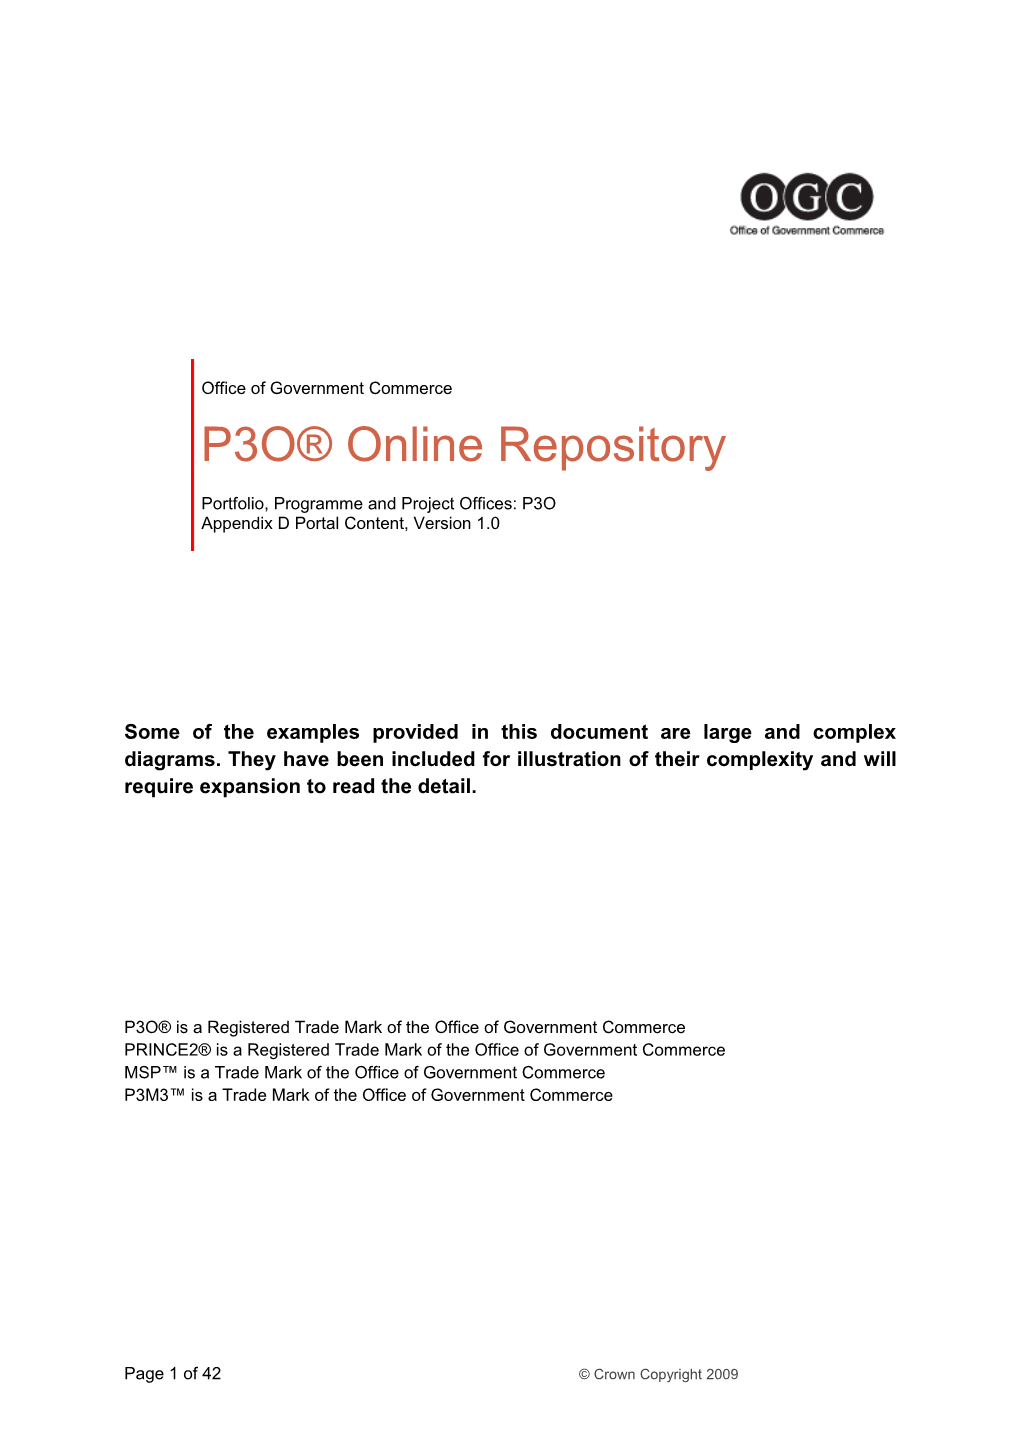 P3O On-Line Repository